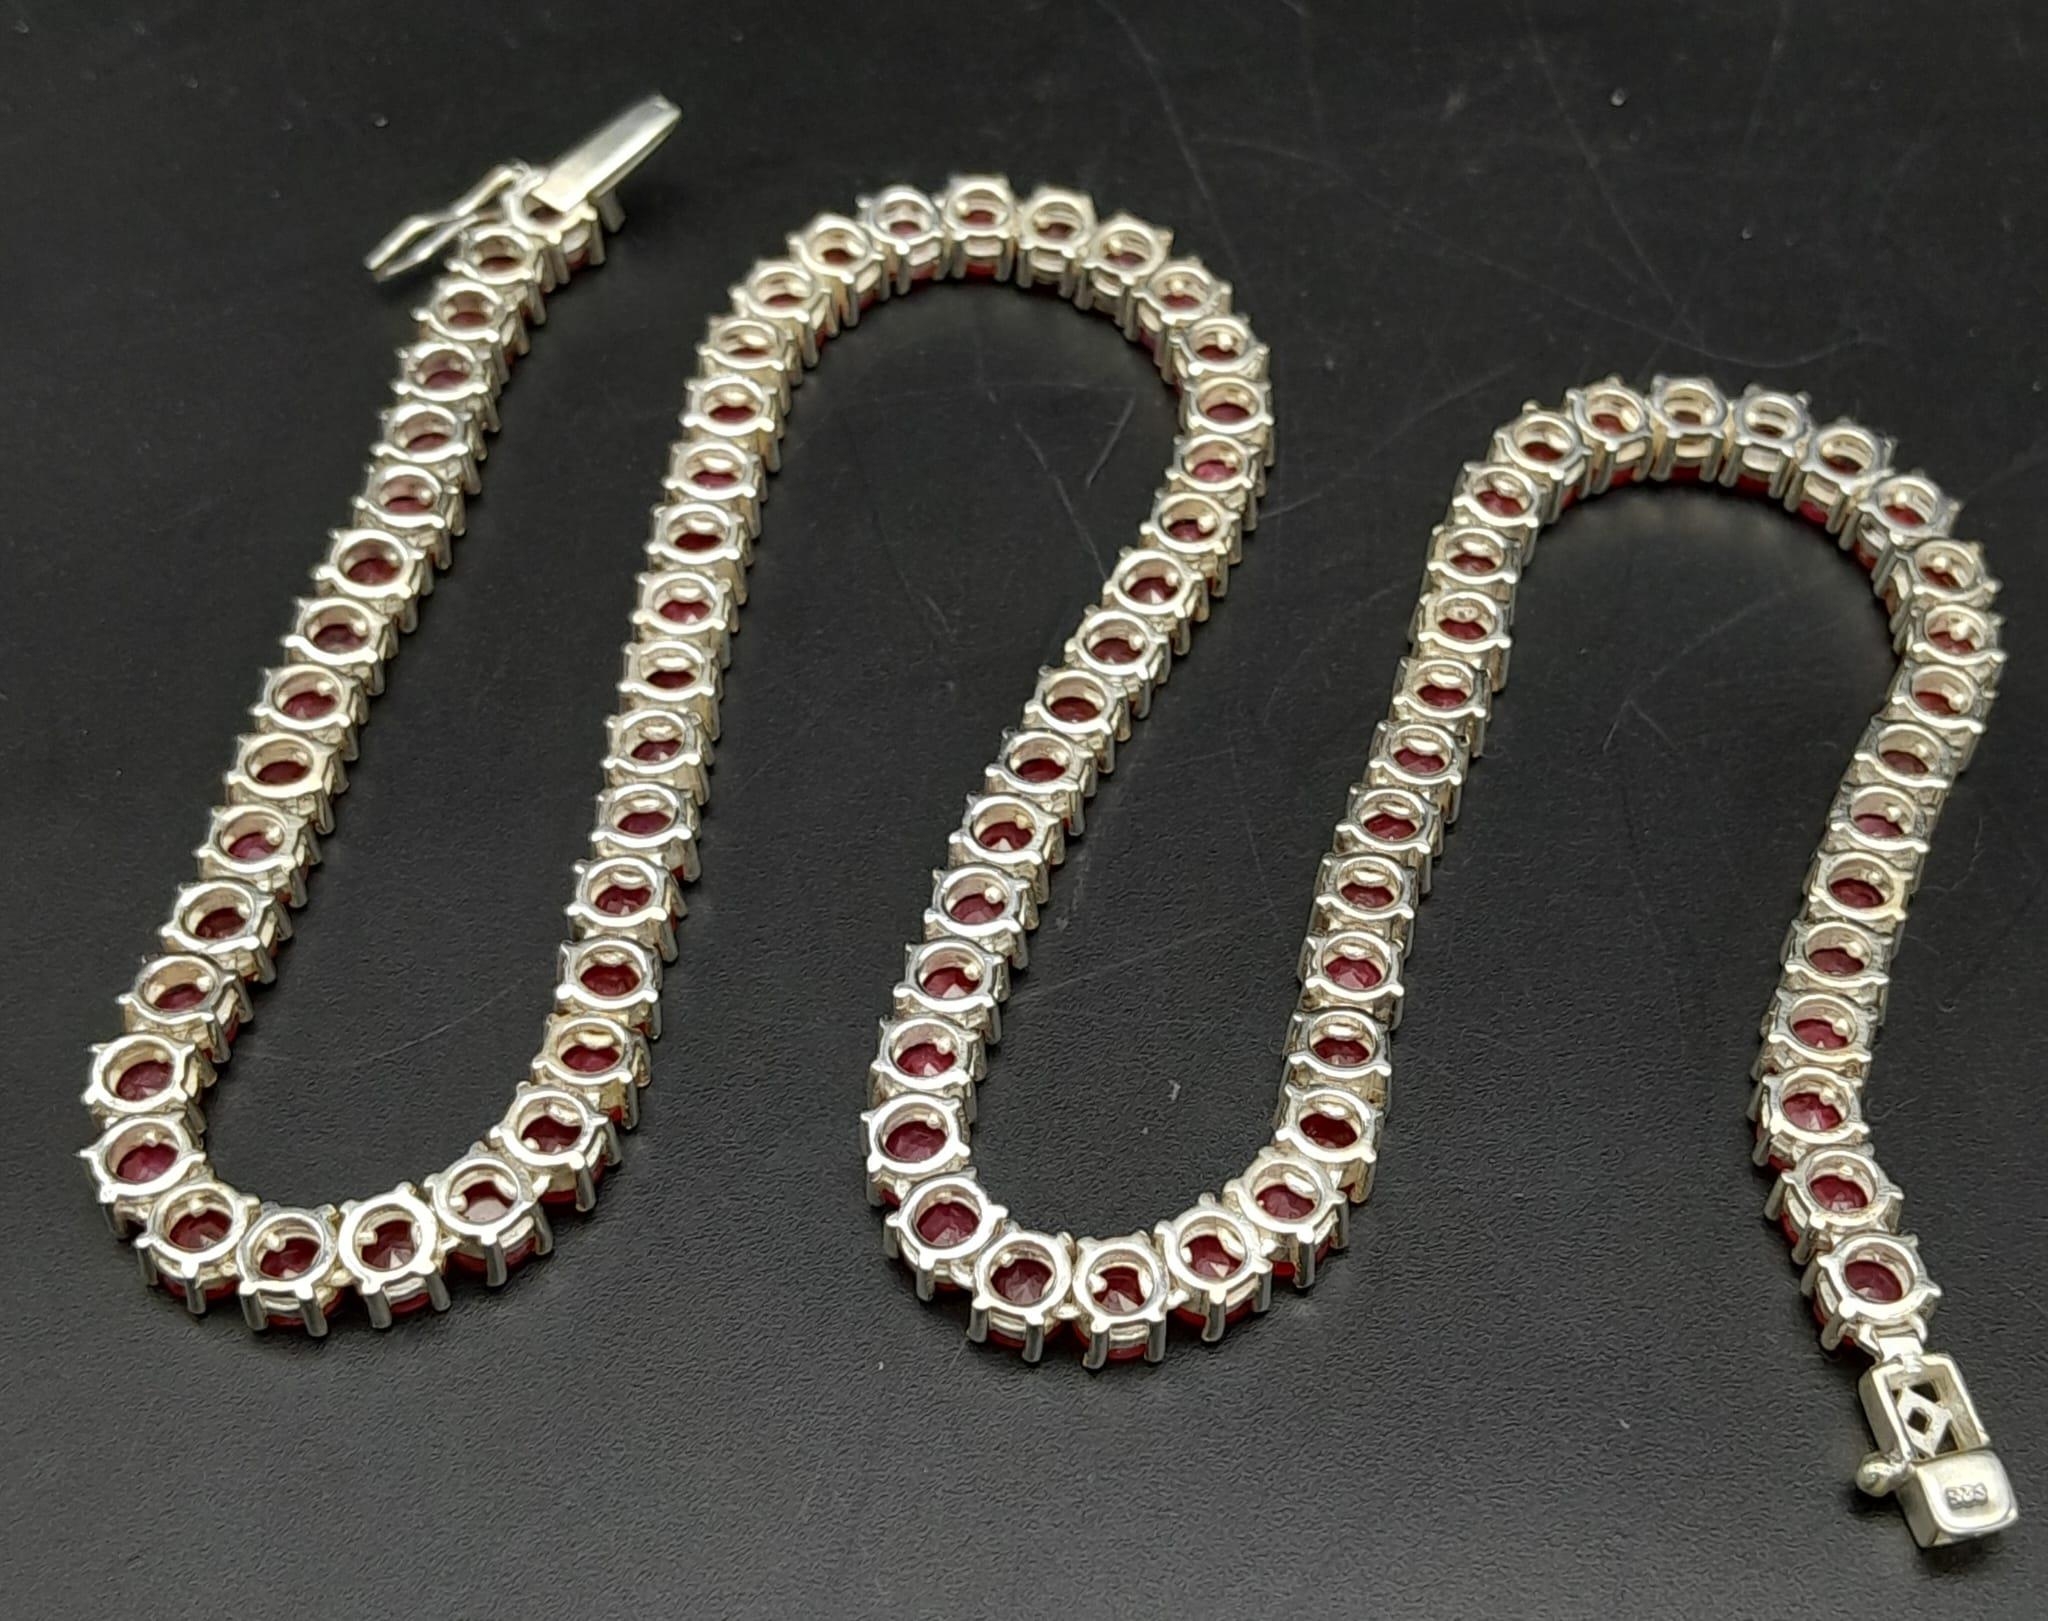 A Ruby Gemstone Tennis Necklace on 925 Silver. Approximately 45cm in length, 43g total weight. - Image 3 of 5